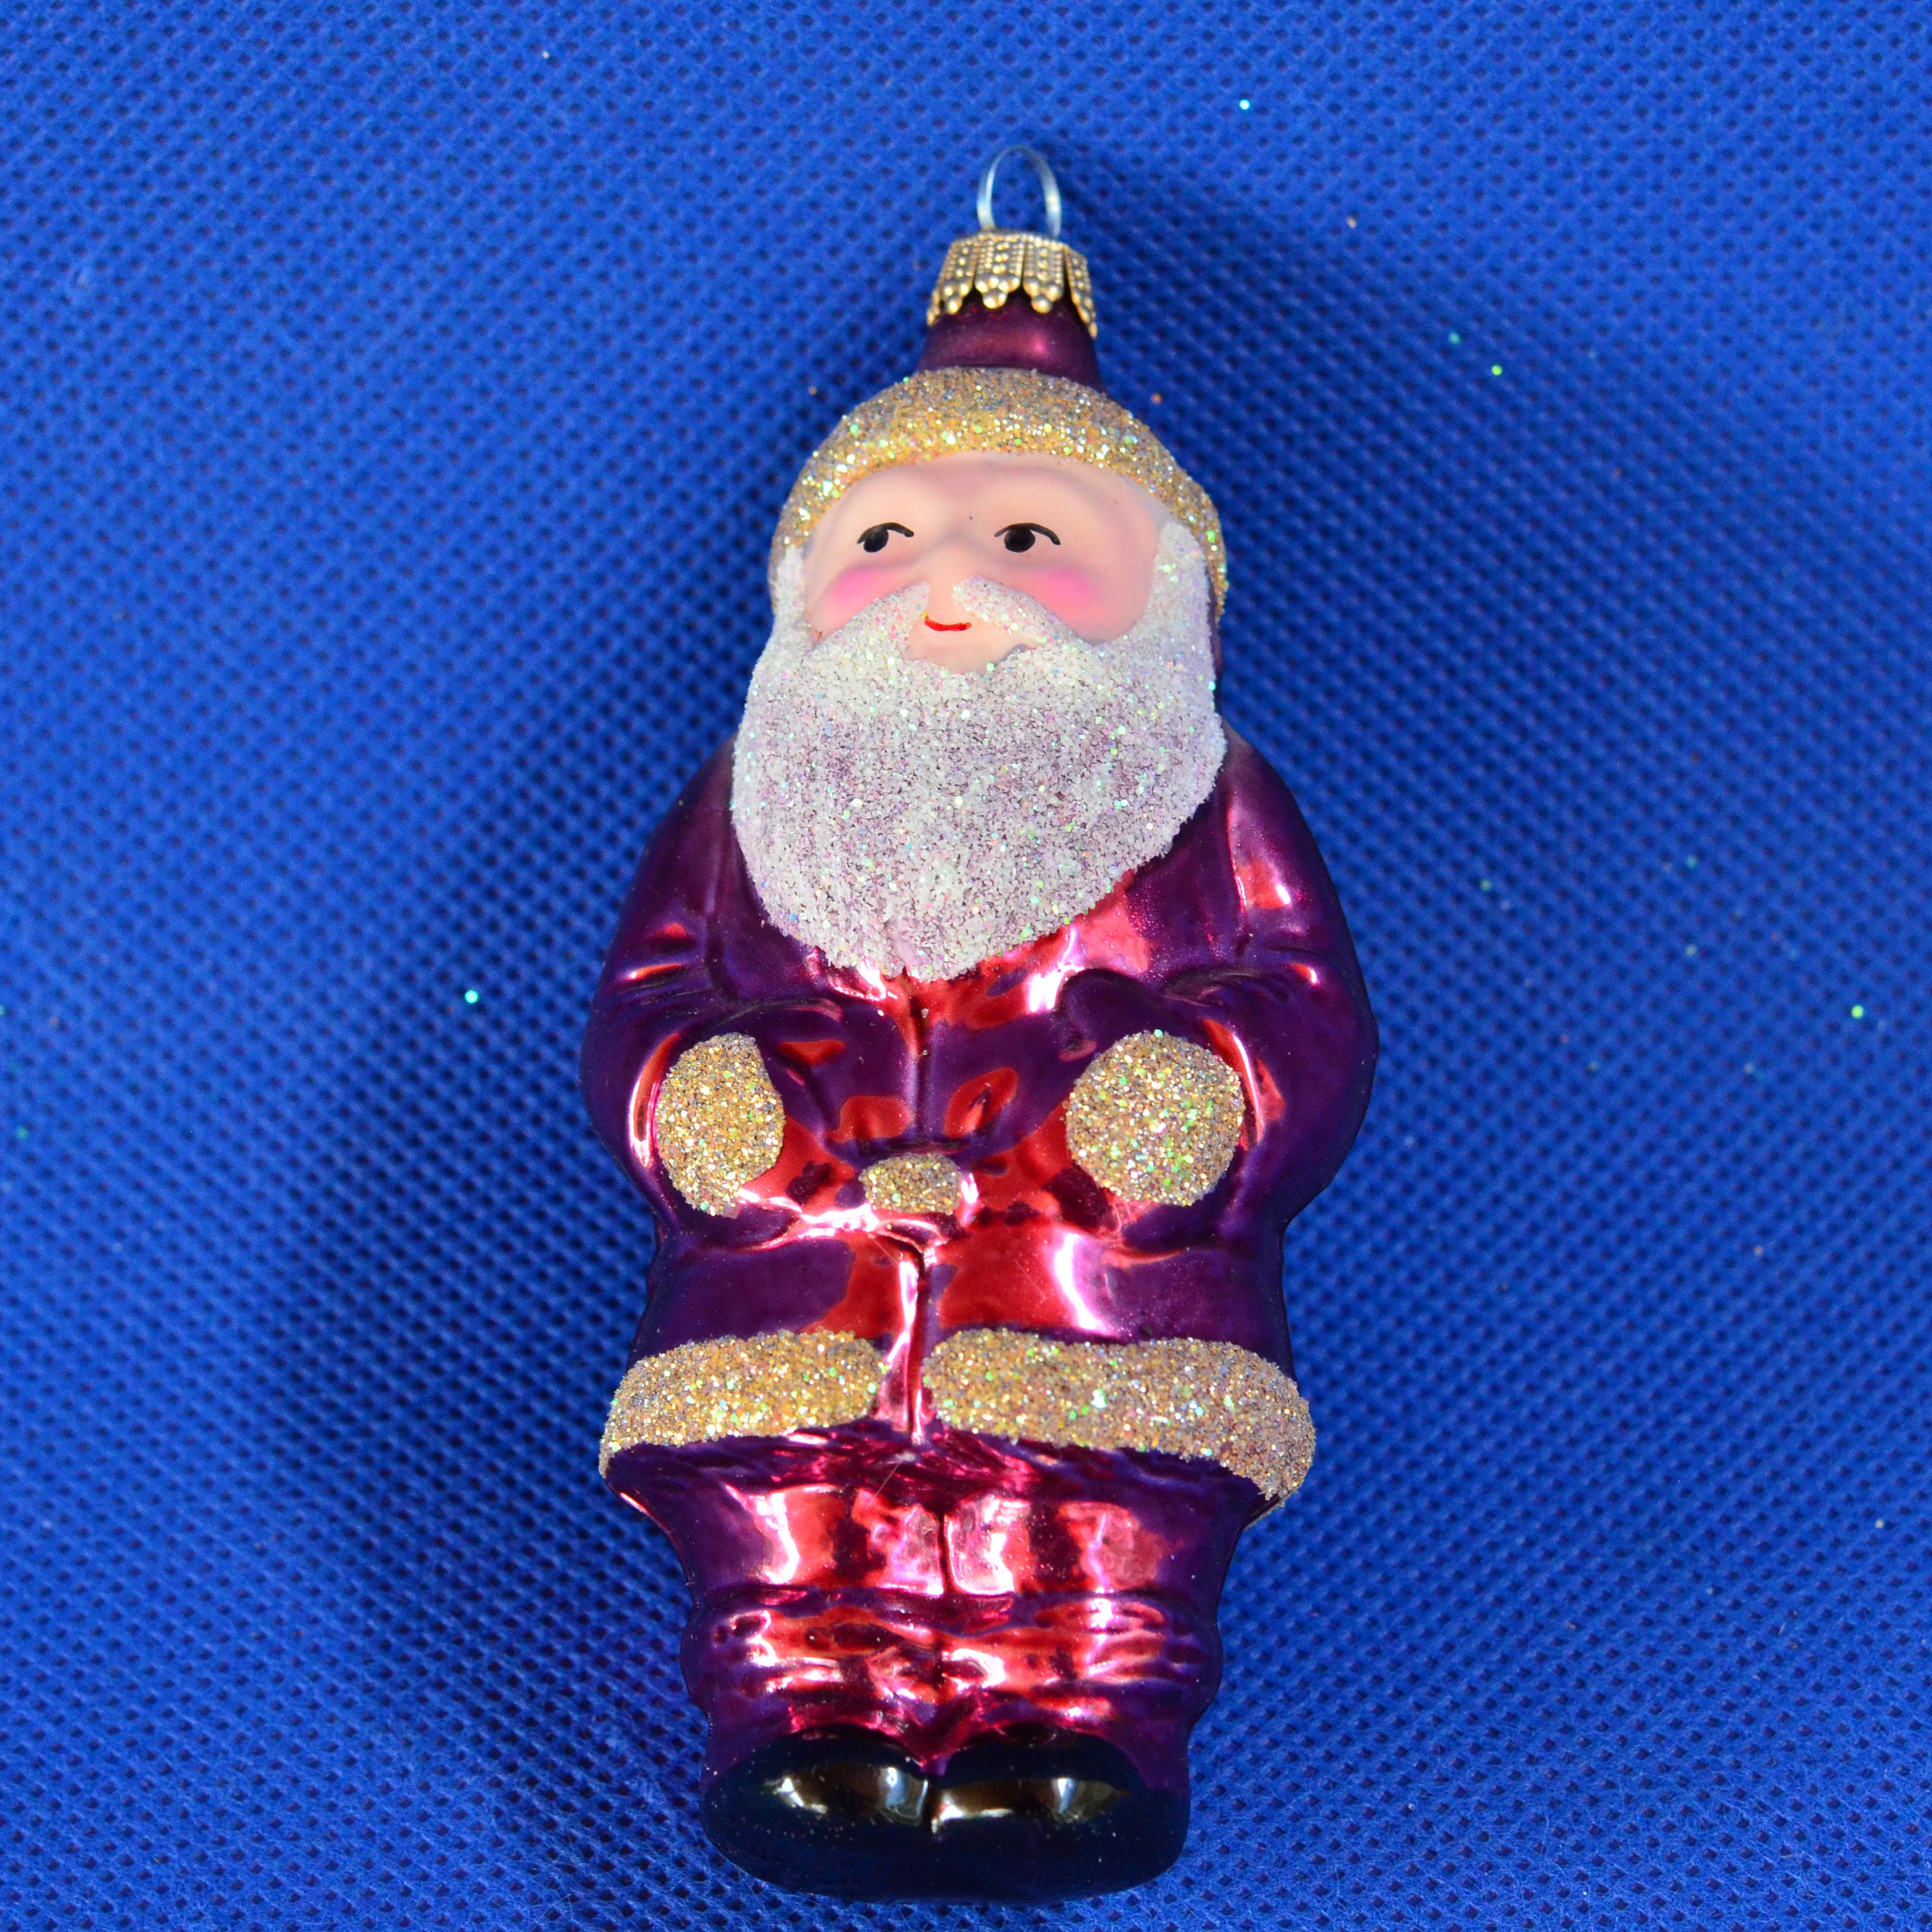 Krebs Lauscha Blown Glass Santa Ornament Hand Decorated Sparkle Glitter  Holiday Christmas Décor Made in West Germany Original Box - Etsy